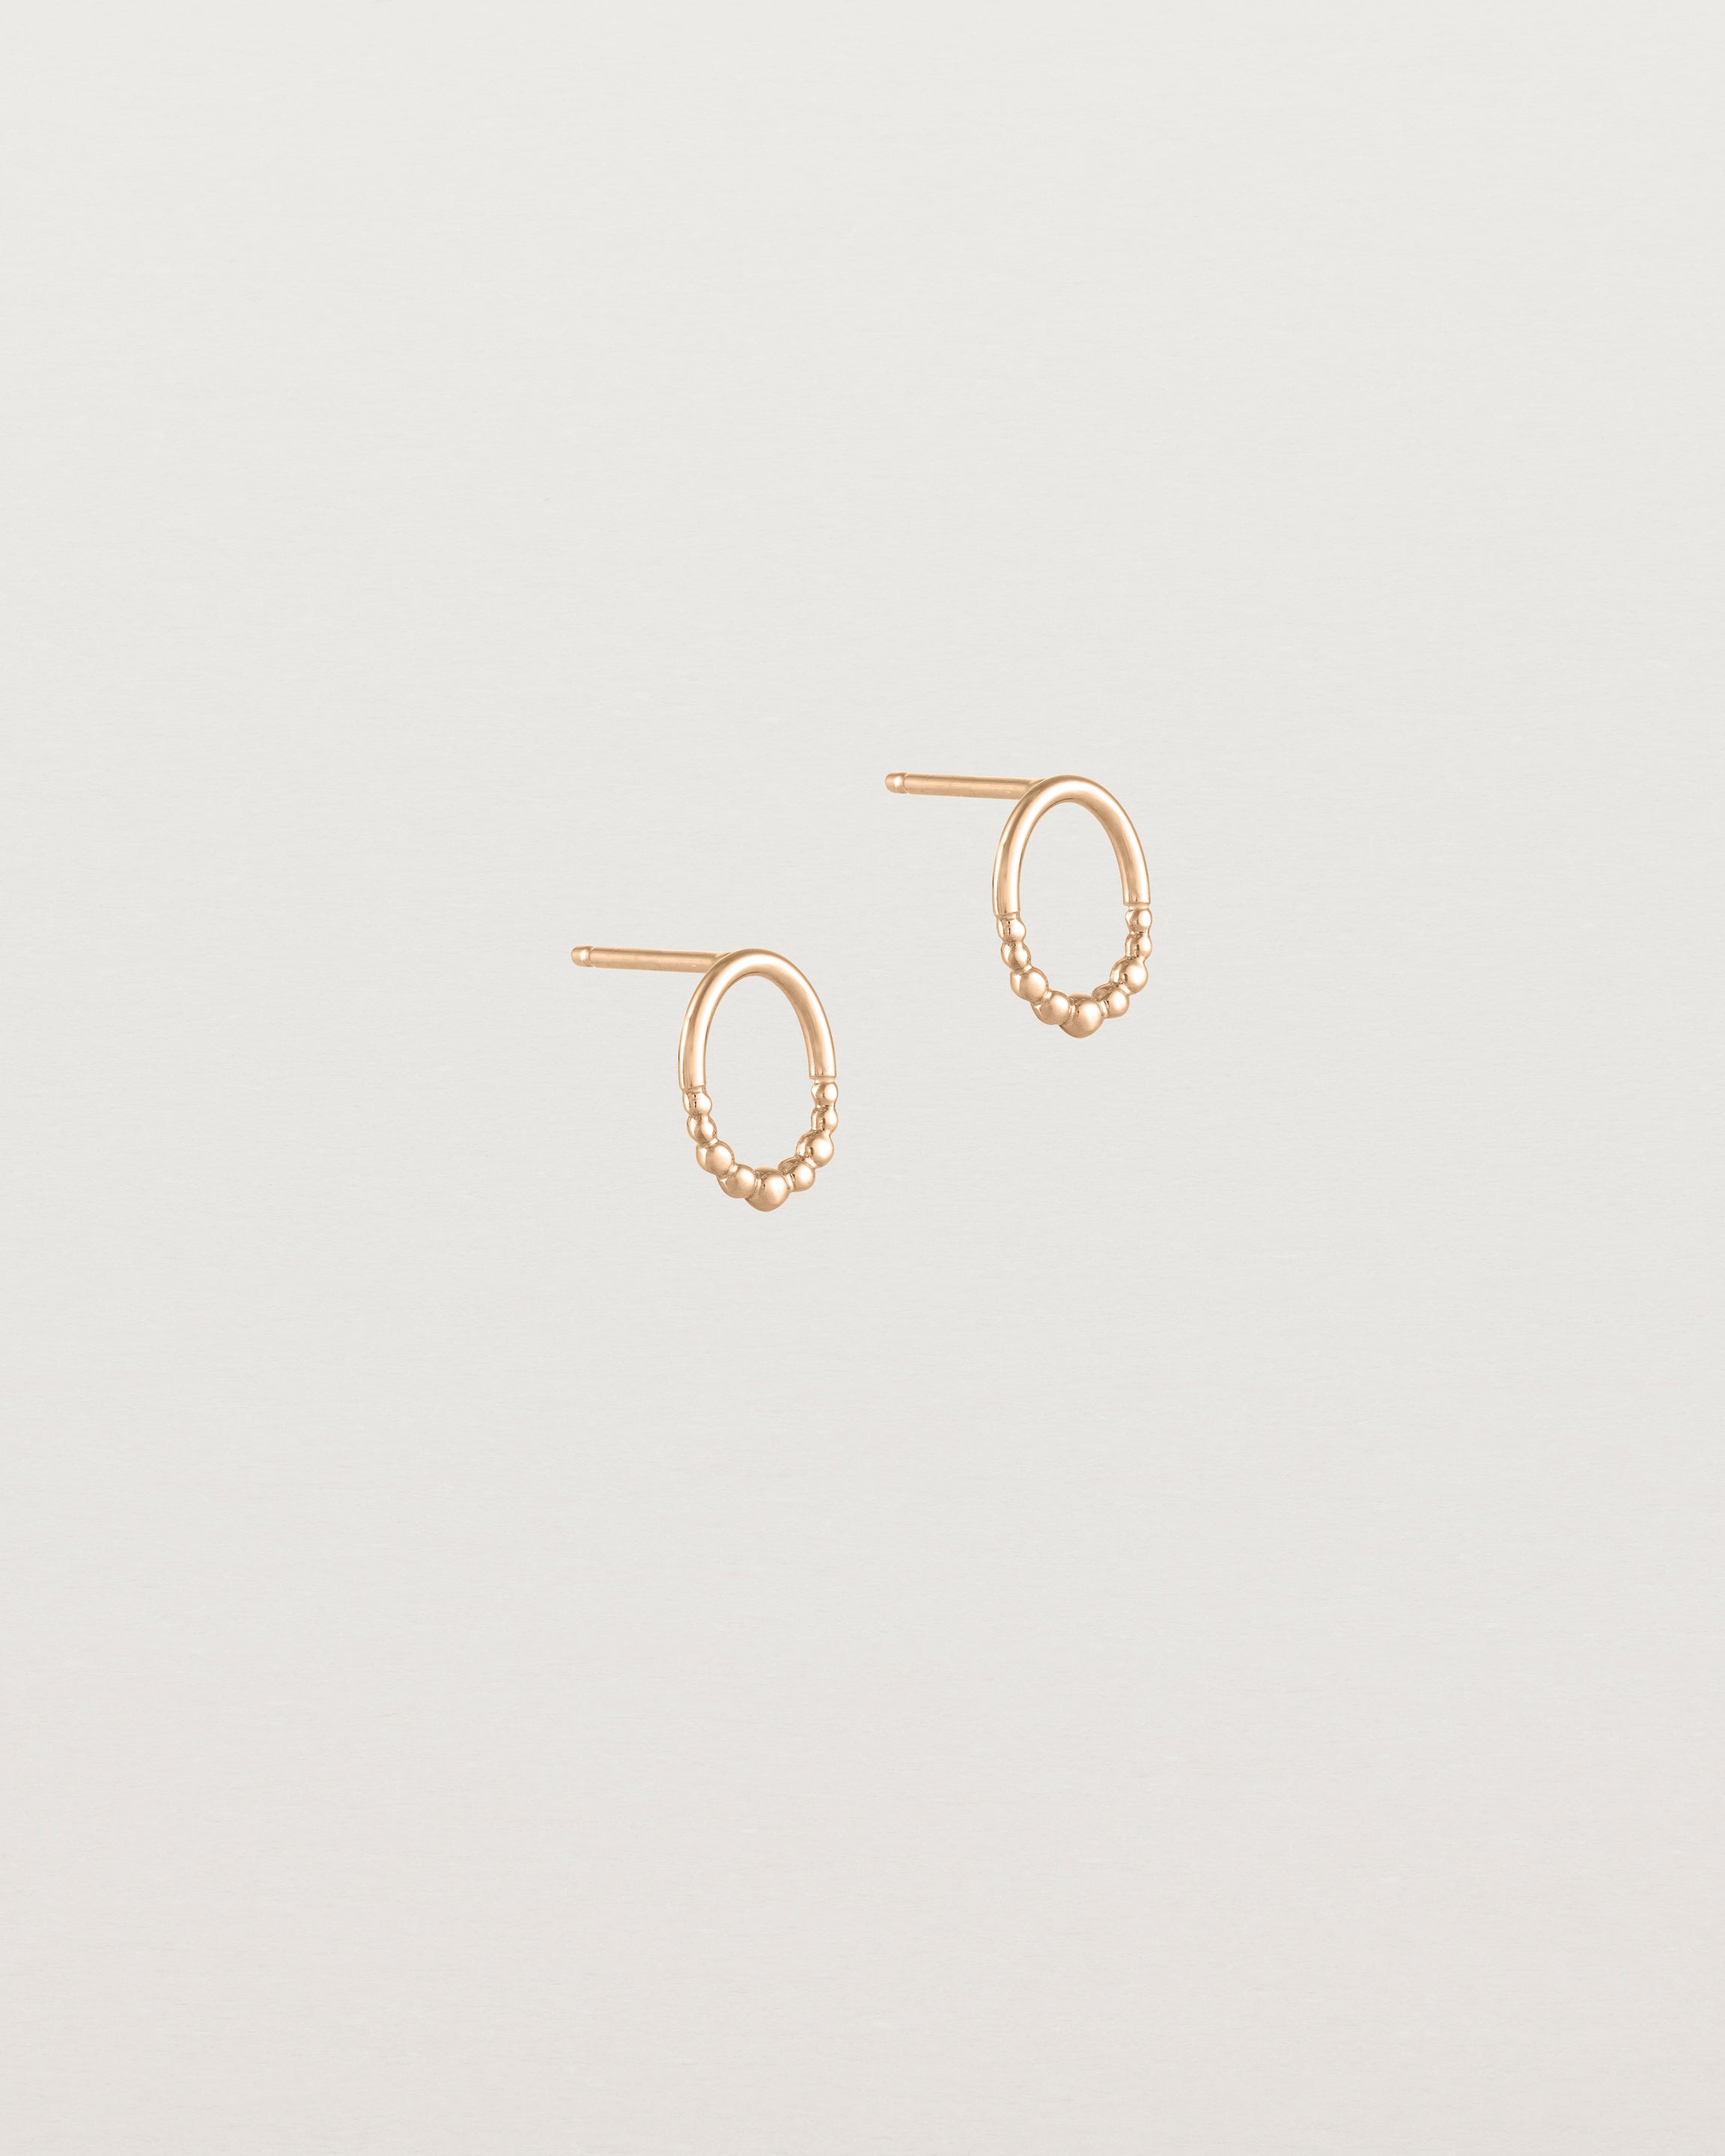 Angled view of the Indra Studs in rose gold.